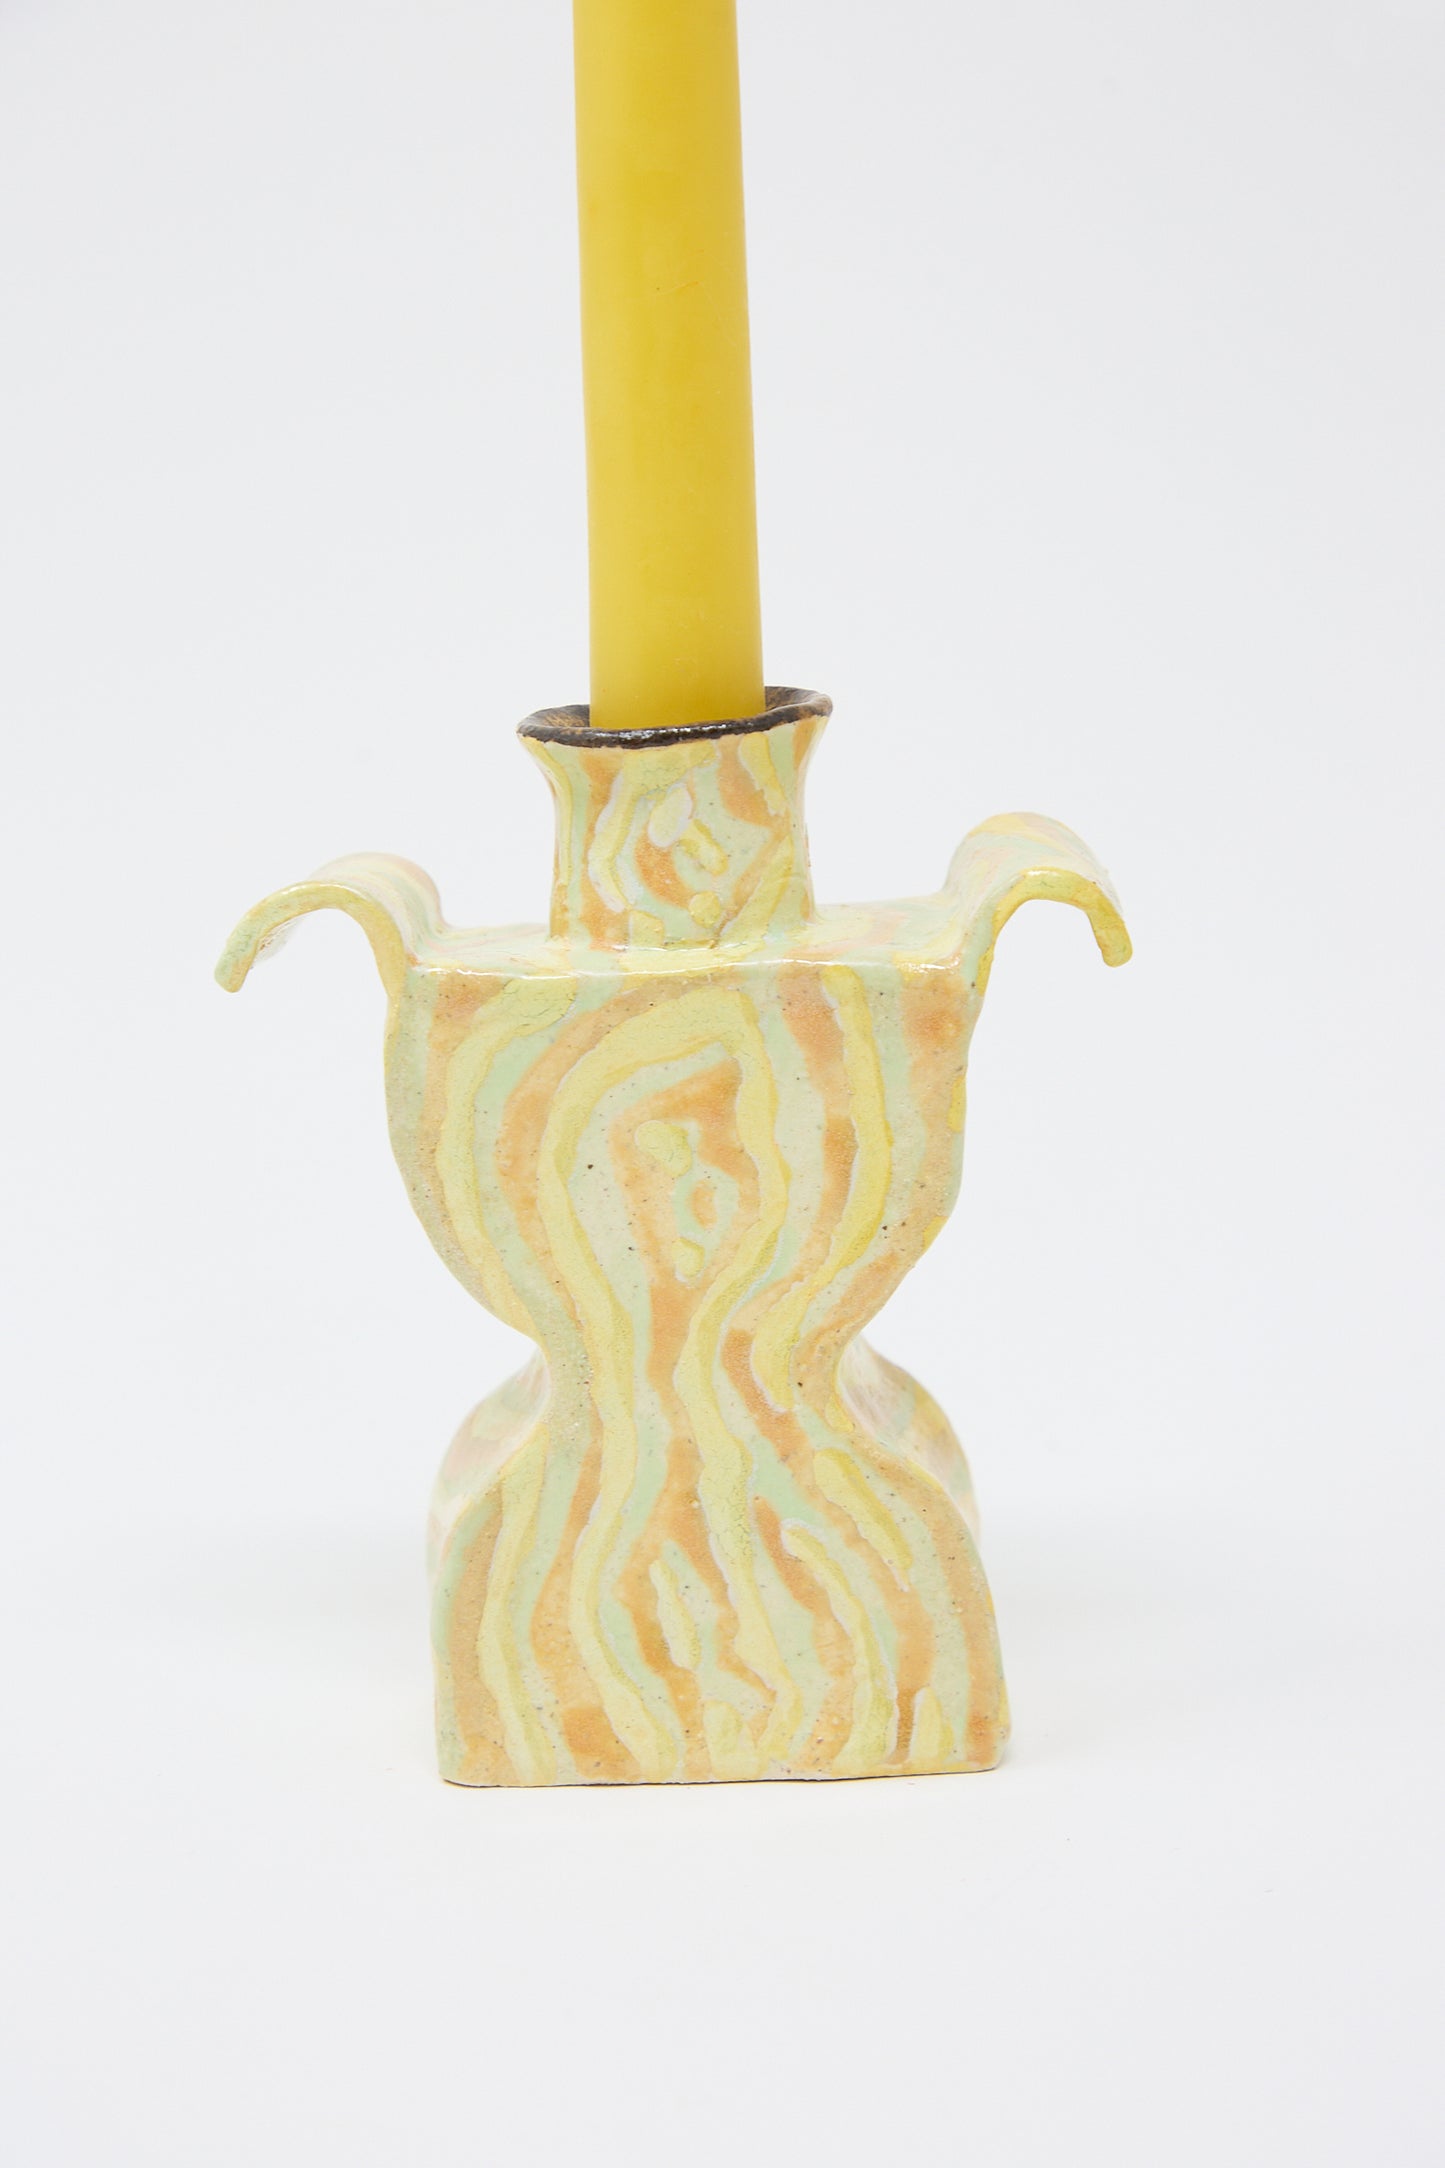 A handcrafted ceramic Woodgrain Candlesticks Pair with a swirling yellow and white pattern, featuring two curved handles, supporting a yellow candle by Pearce Williams.